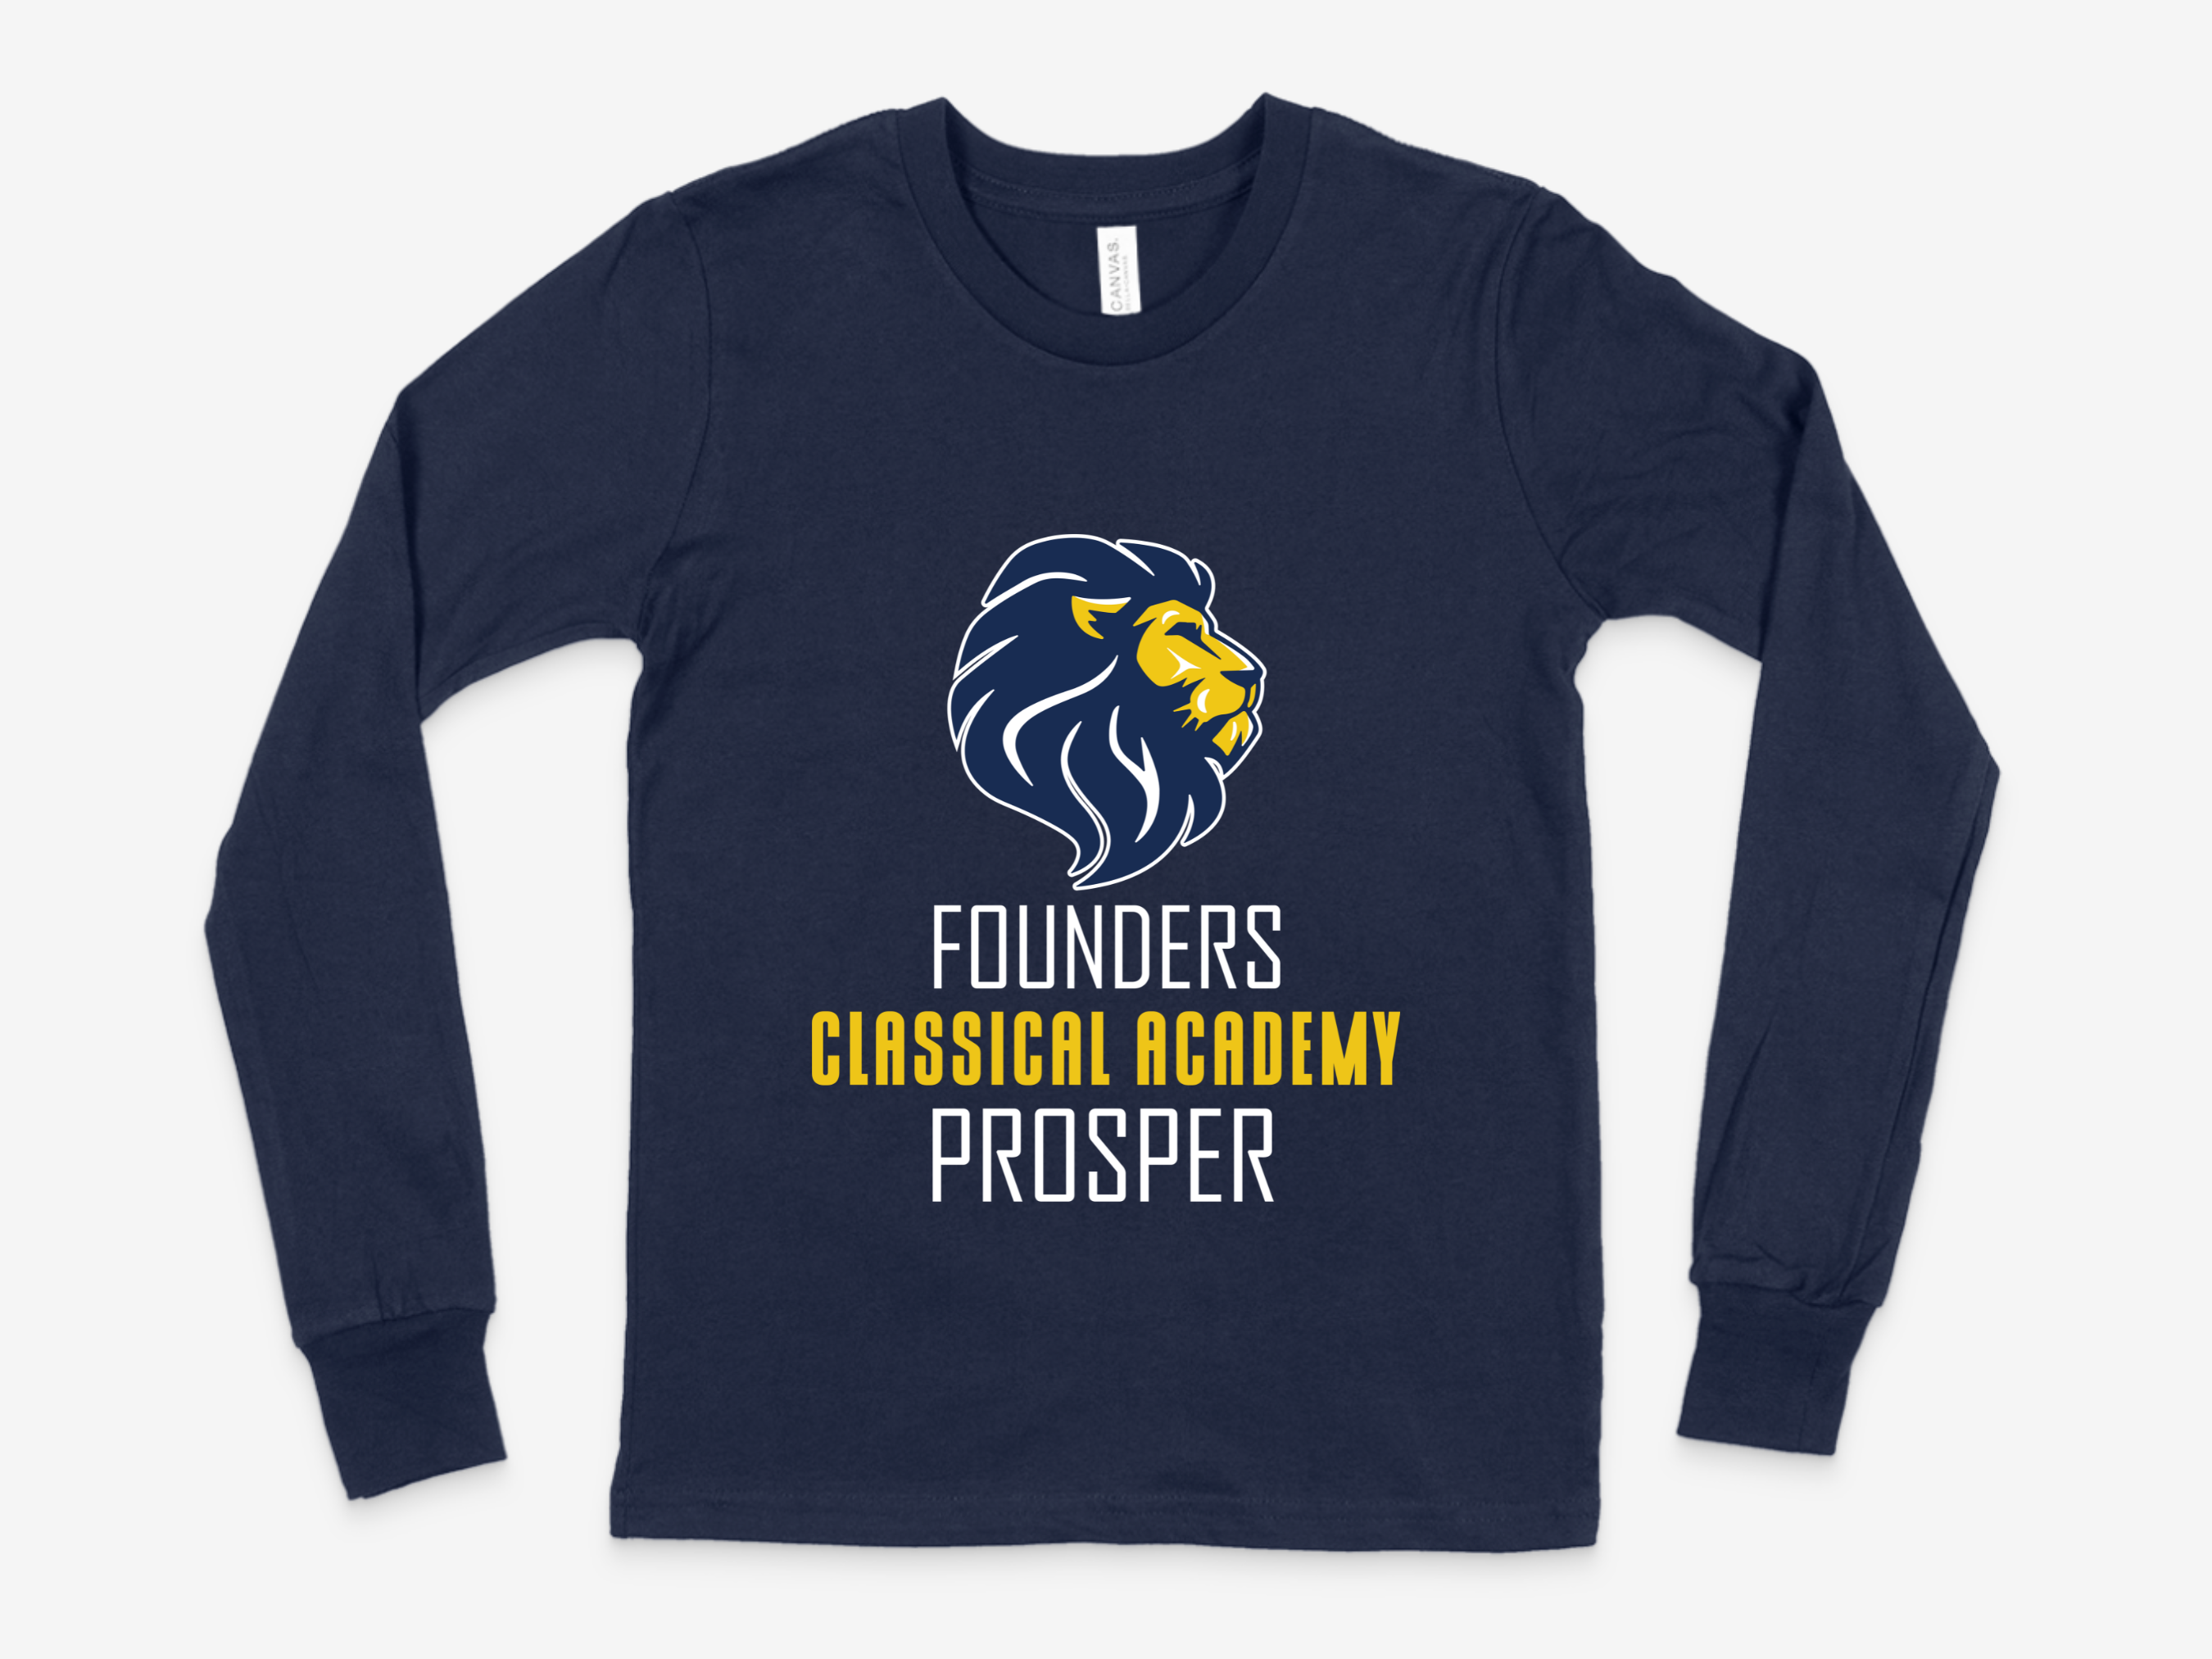 Founders Classical Academy Prosper  - Navy Long Sleeve  Large Image